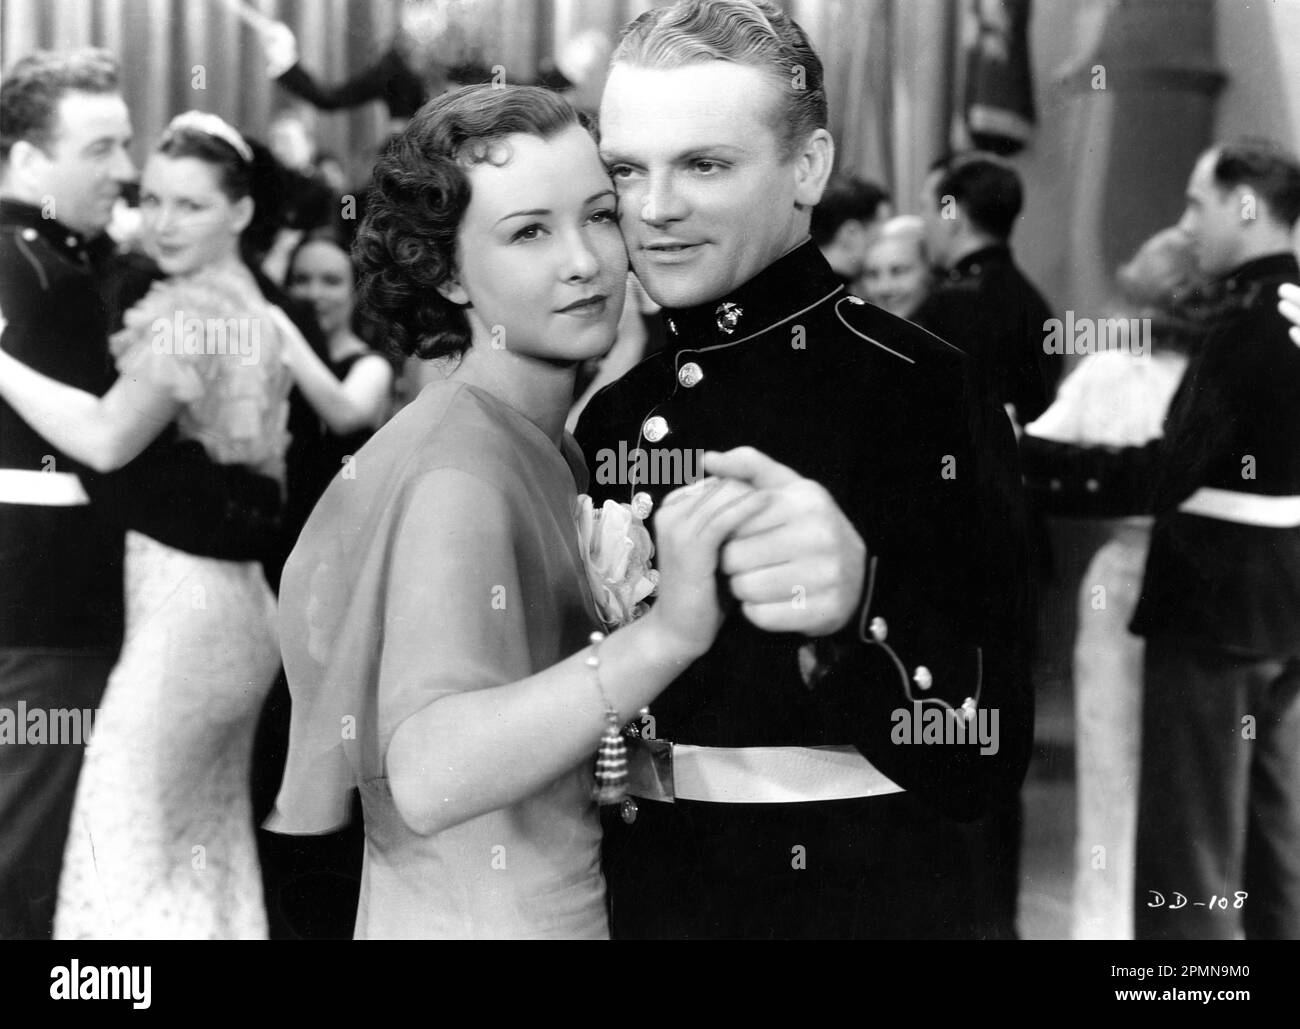 MARGARET LINDSAY and JAMES CAGNEY in DEVIL DOGS OF THE AIR 1935 director LLOYD BACON based on story by John Monk Saunders costume design Orry-Kelly A Cosmopolitan Production / Warner Bros. Stock Photo